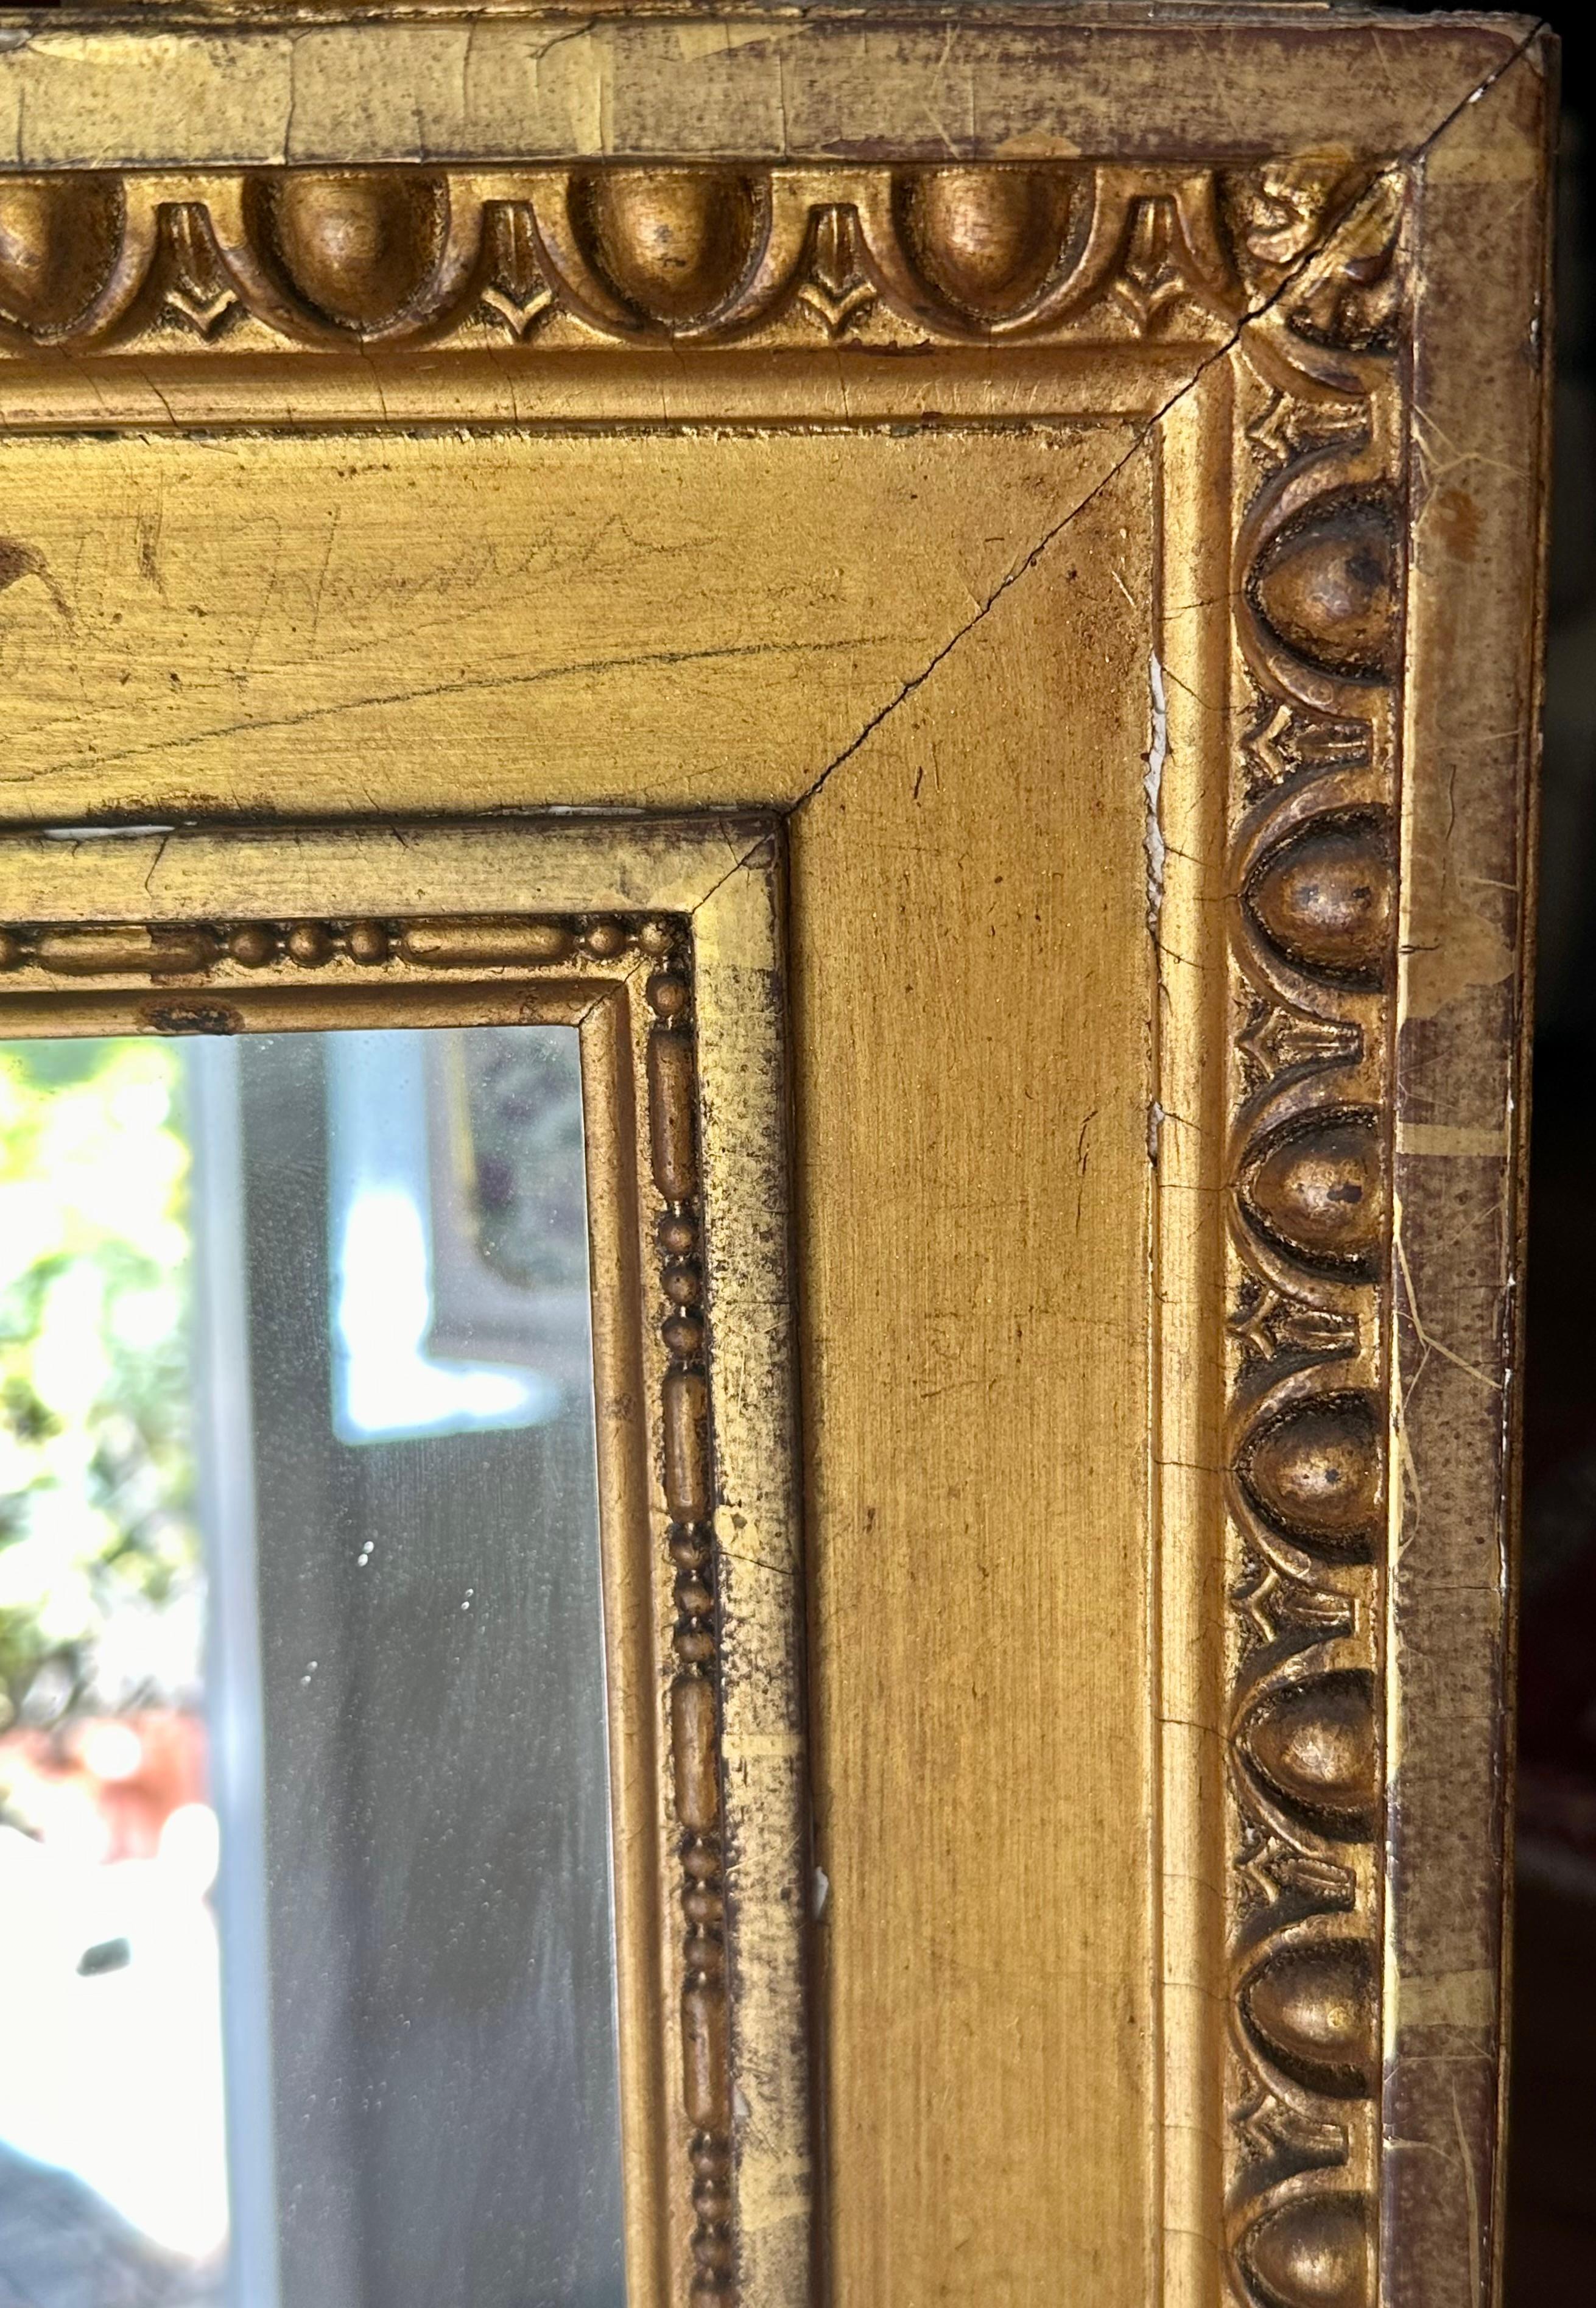 French 19th Century Louis XVI Style Large Gilded Wall Mirror

Large 19th century French Louis XVI style gilded wall mirror. Beautiful and elegantly designed frame with egg and dart edging. The crest features wreath and ribbon. Two urns adorned the